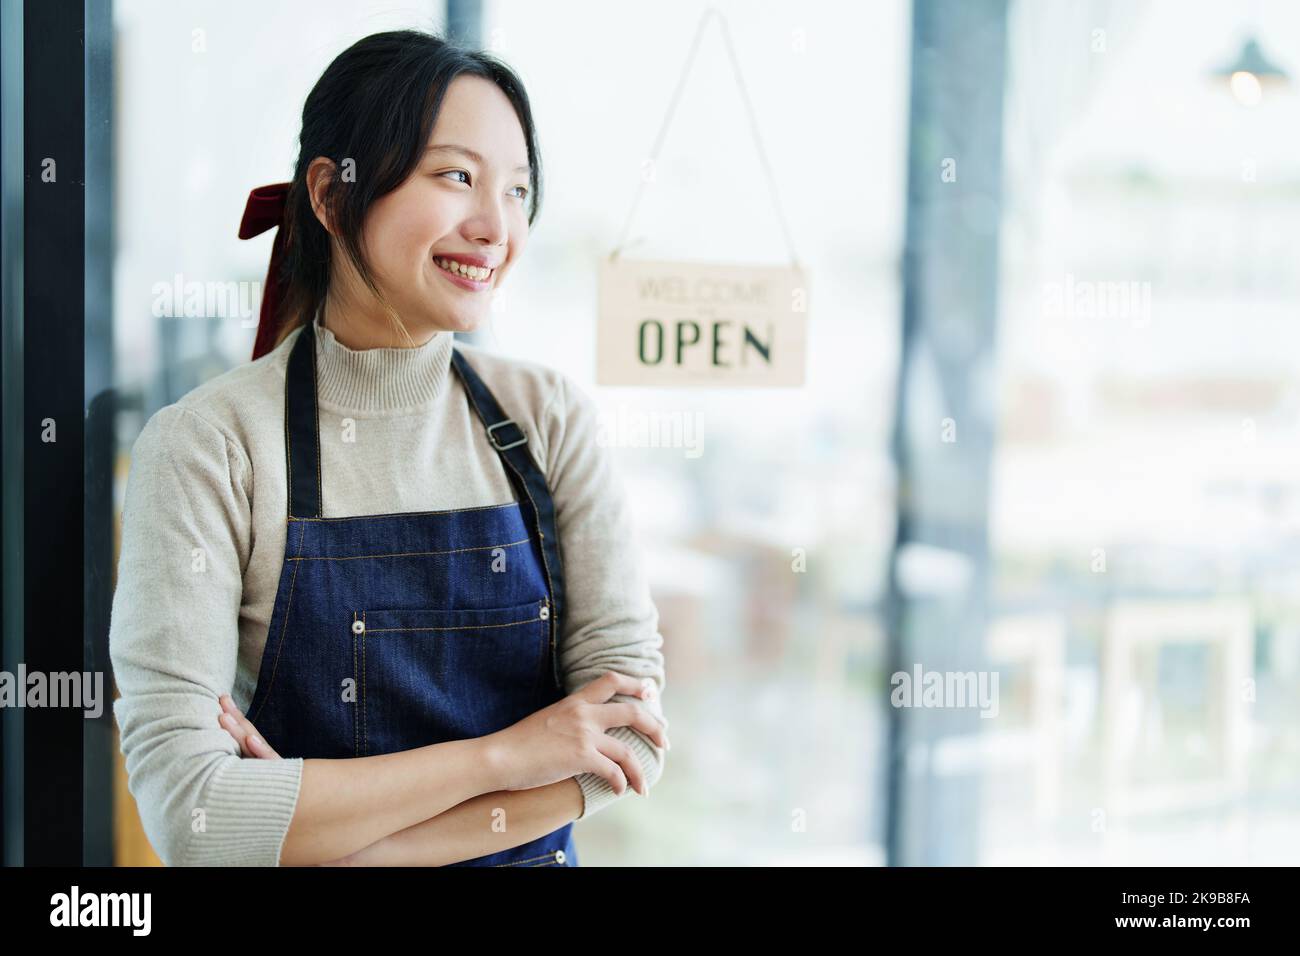 Starting and opening a small business, a young Asian woman showing a smiling face in an apron standing in front of a coffee shop bar counter. Business Stock Photo